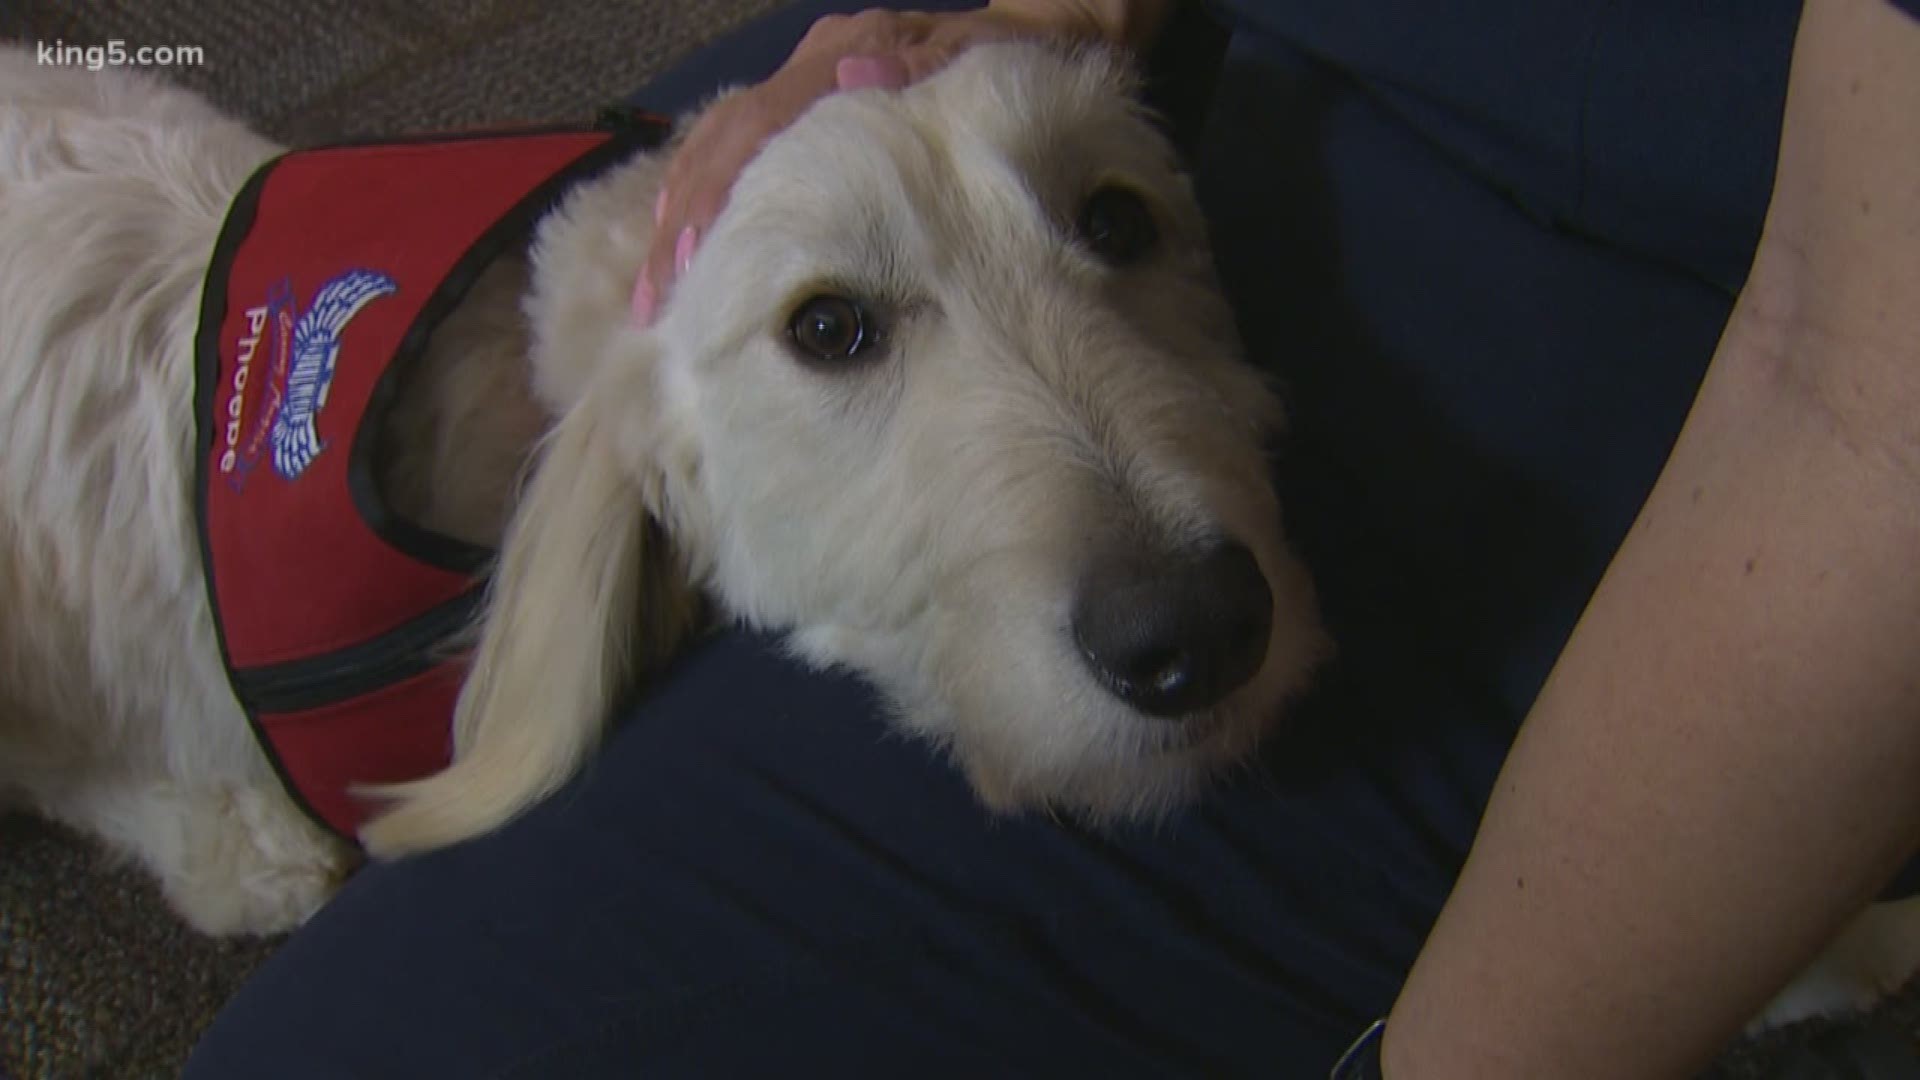 Phoebe is a one-year-old Goldendoodle who helps firefighters and emergency crews through the stresses of their jobs.